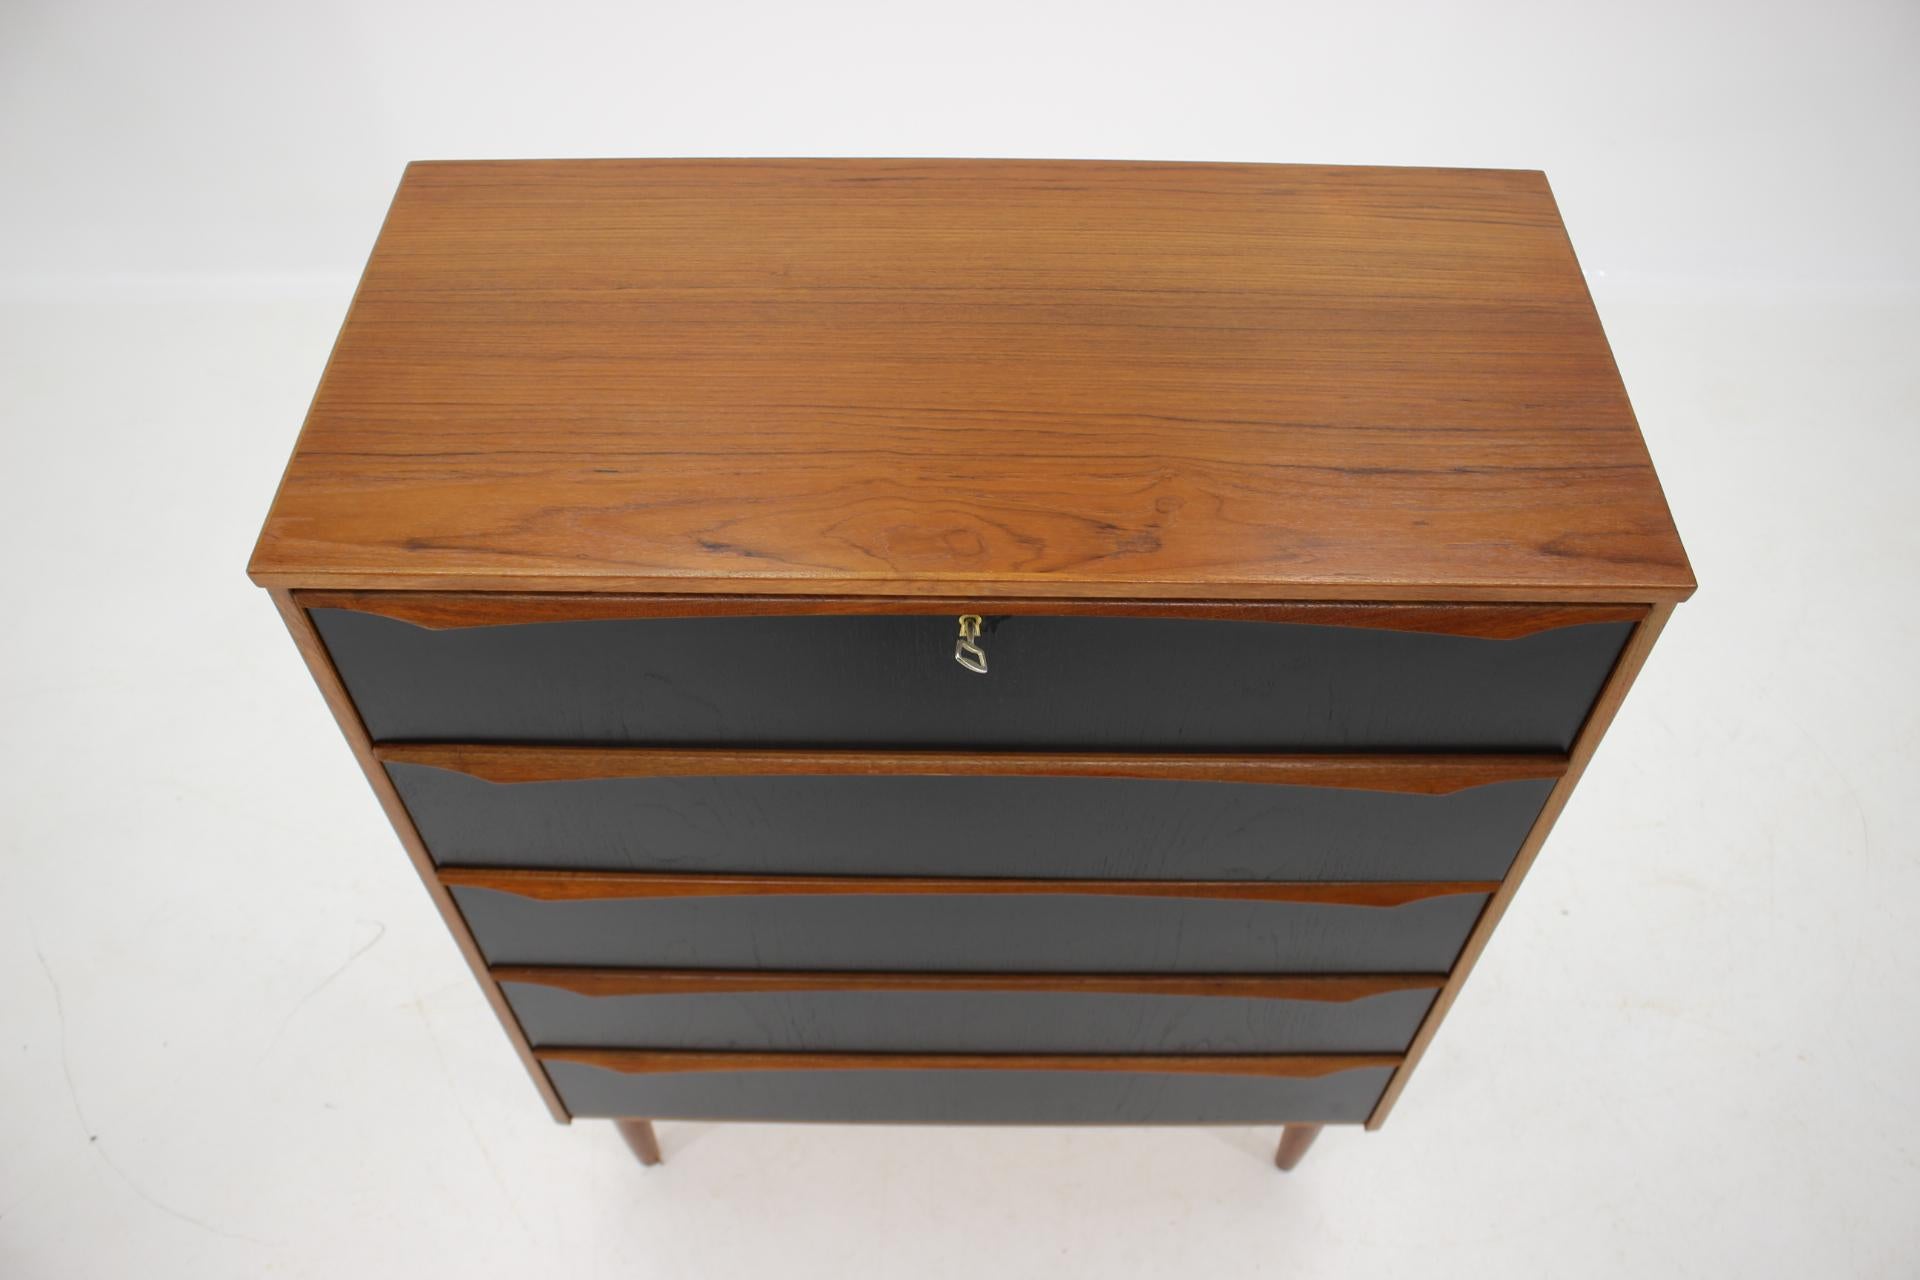 - Five drawers were black lacquered afterwards
- Item was carefully refurbished.